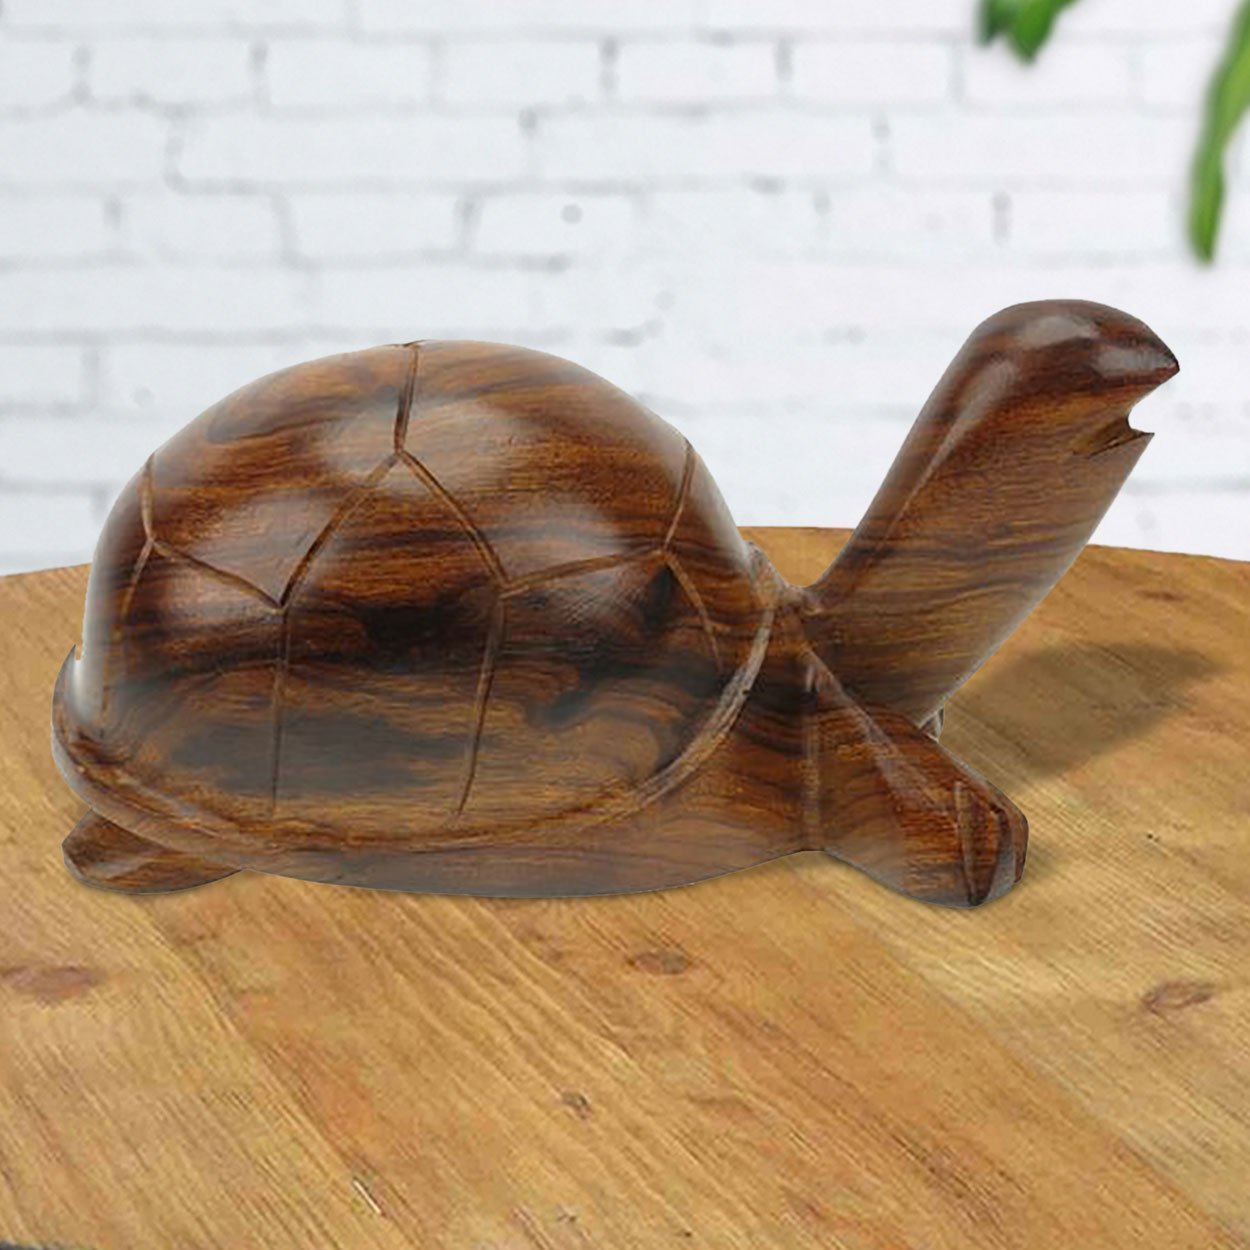 172167 - 6in Long Turtle Ironwood Carving